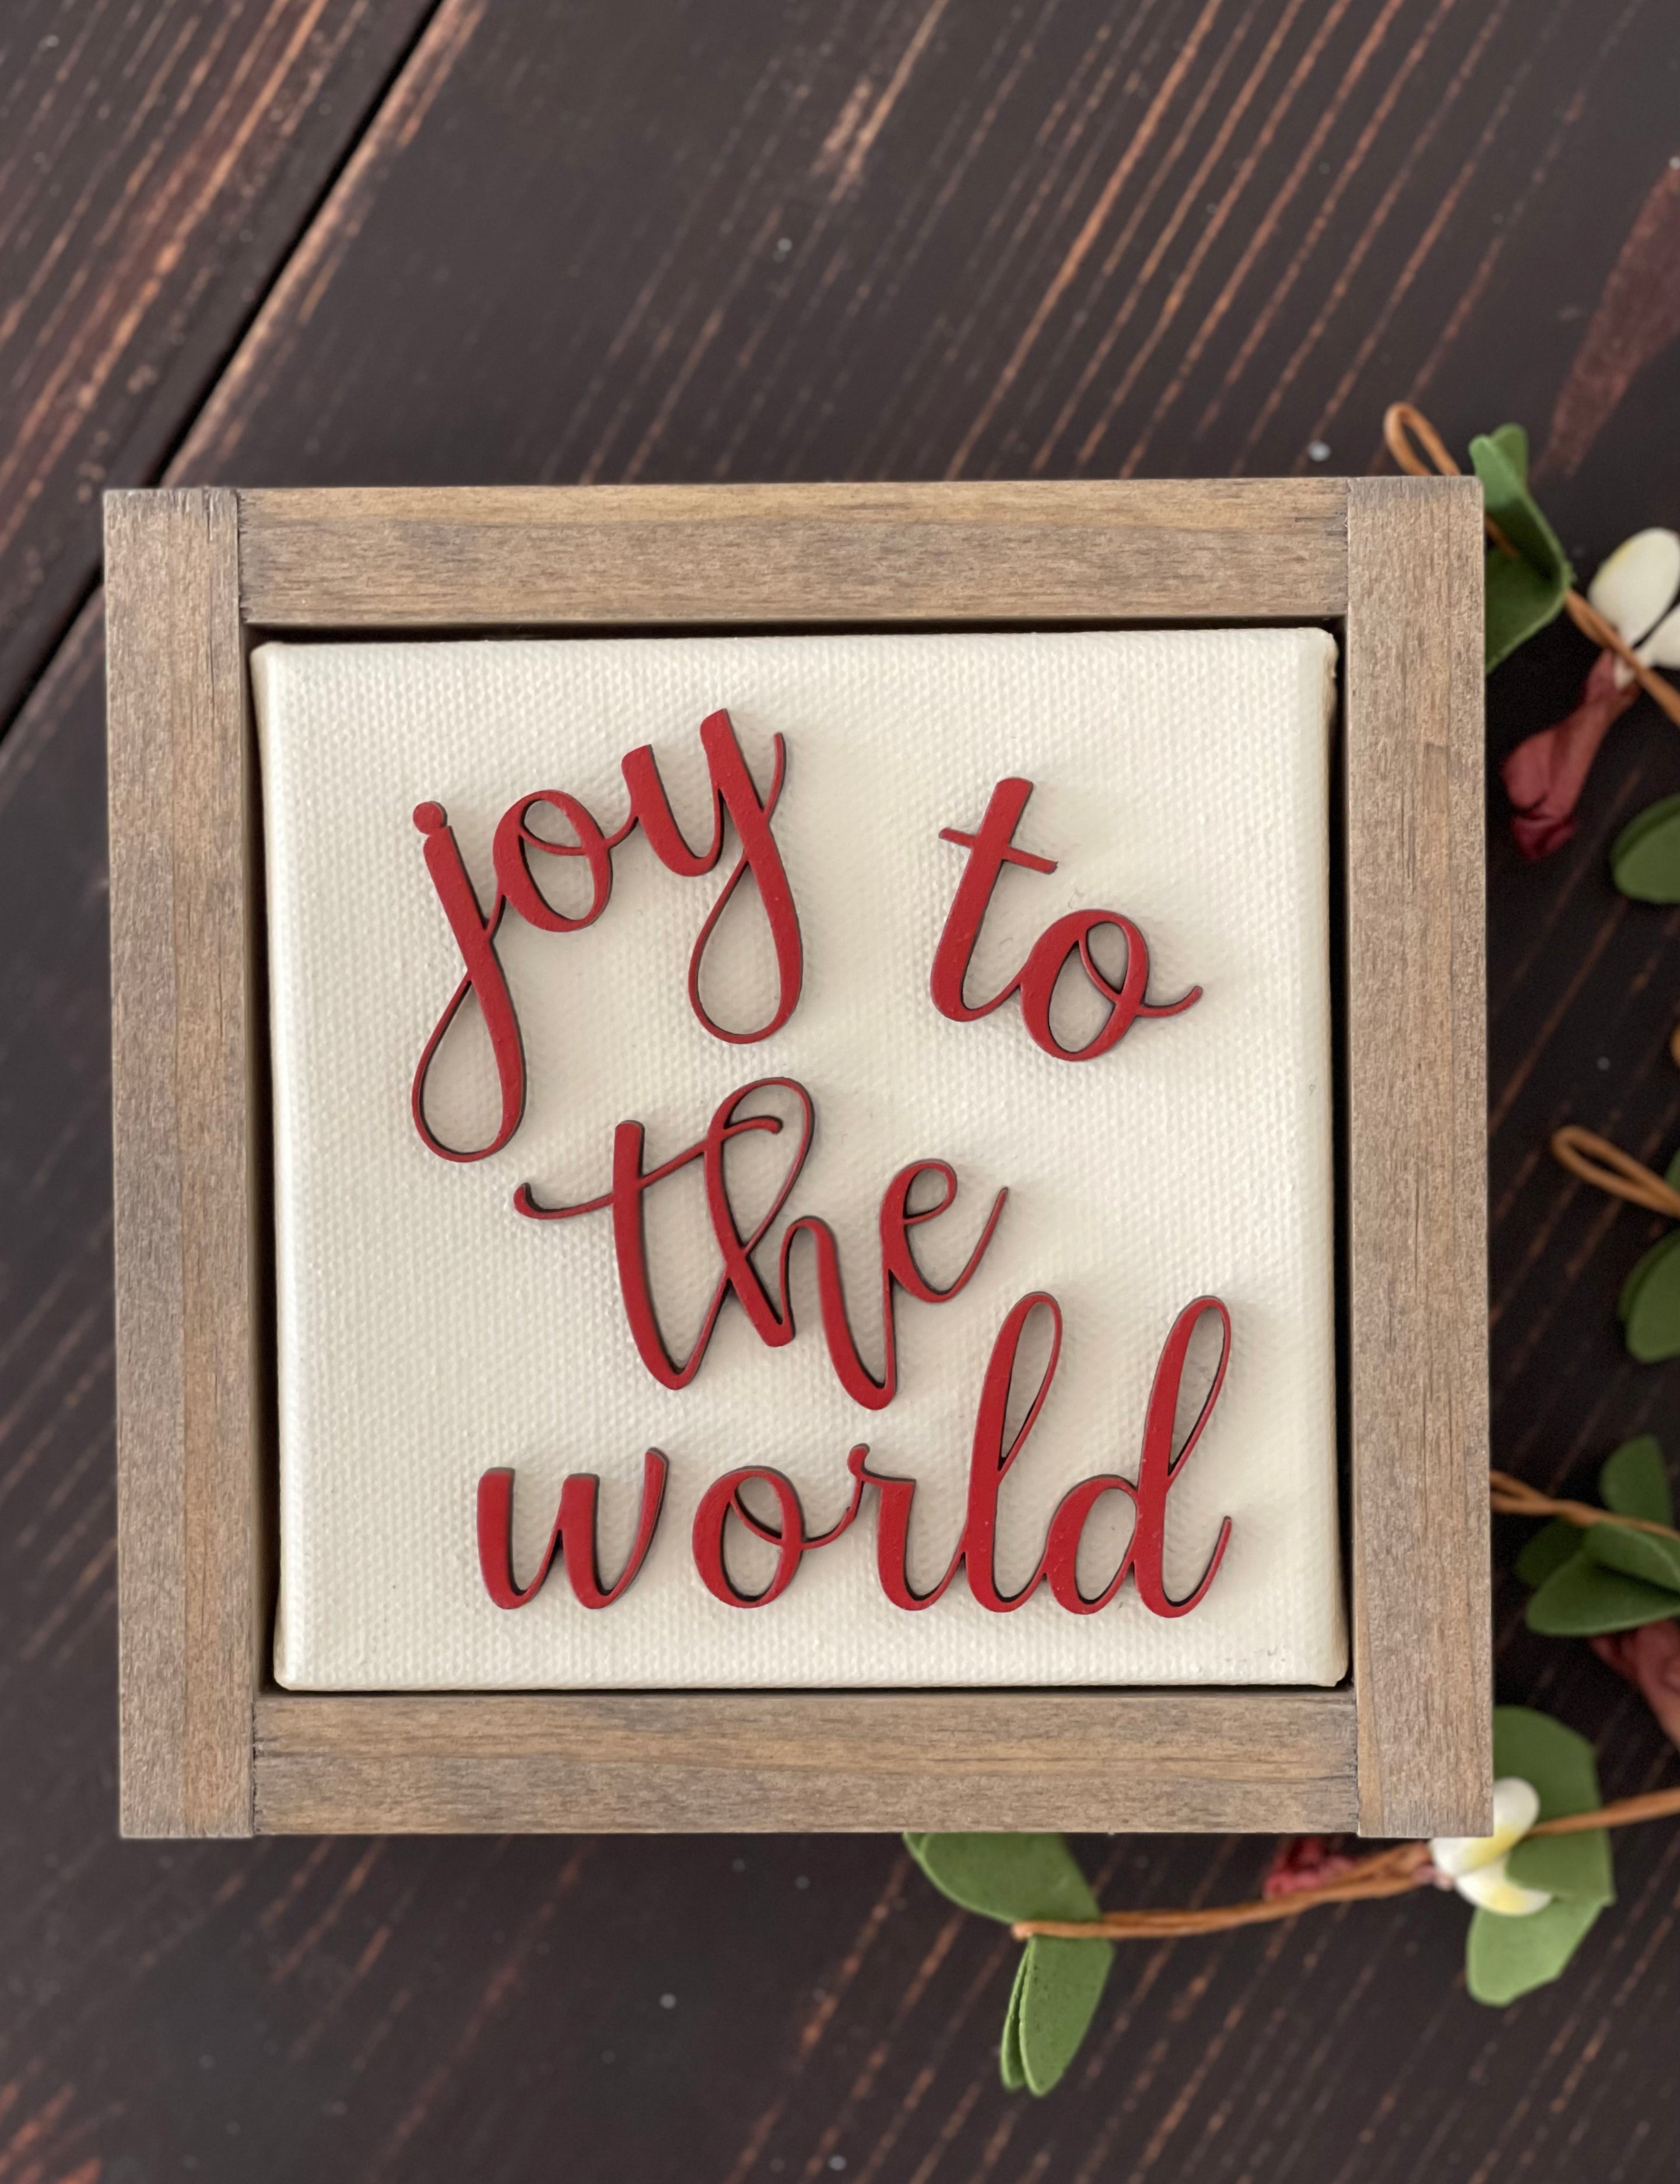 This image of Joy To The World is shown laying on a wood bench with a floral greenery stem.